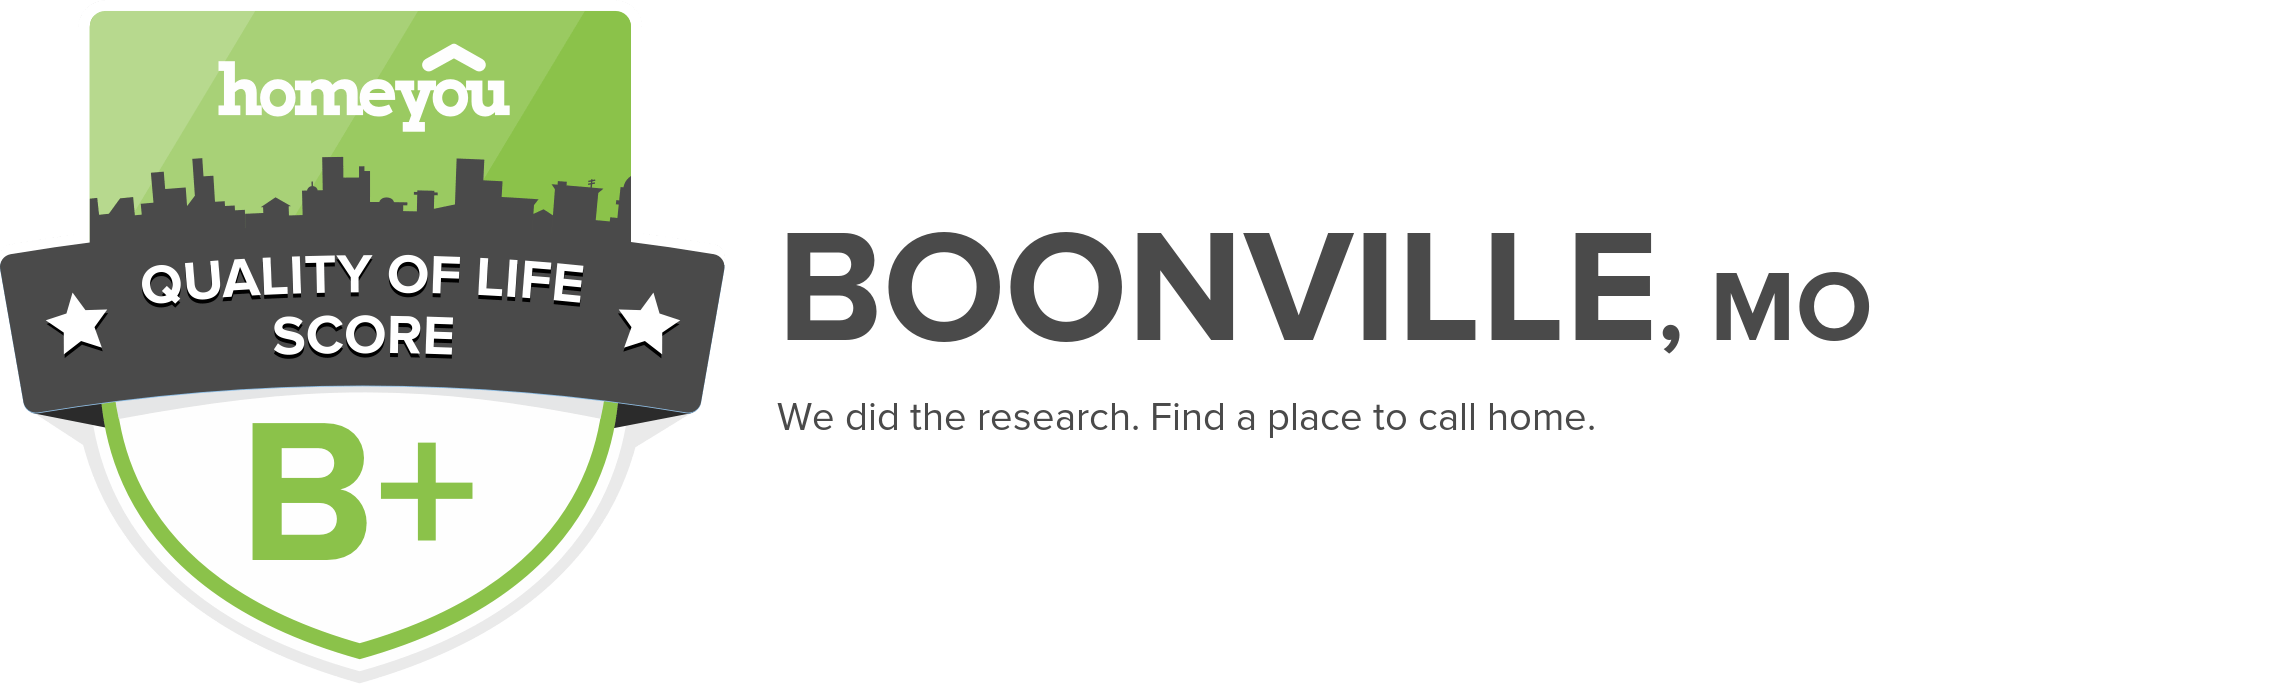 Boonville, MO